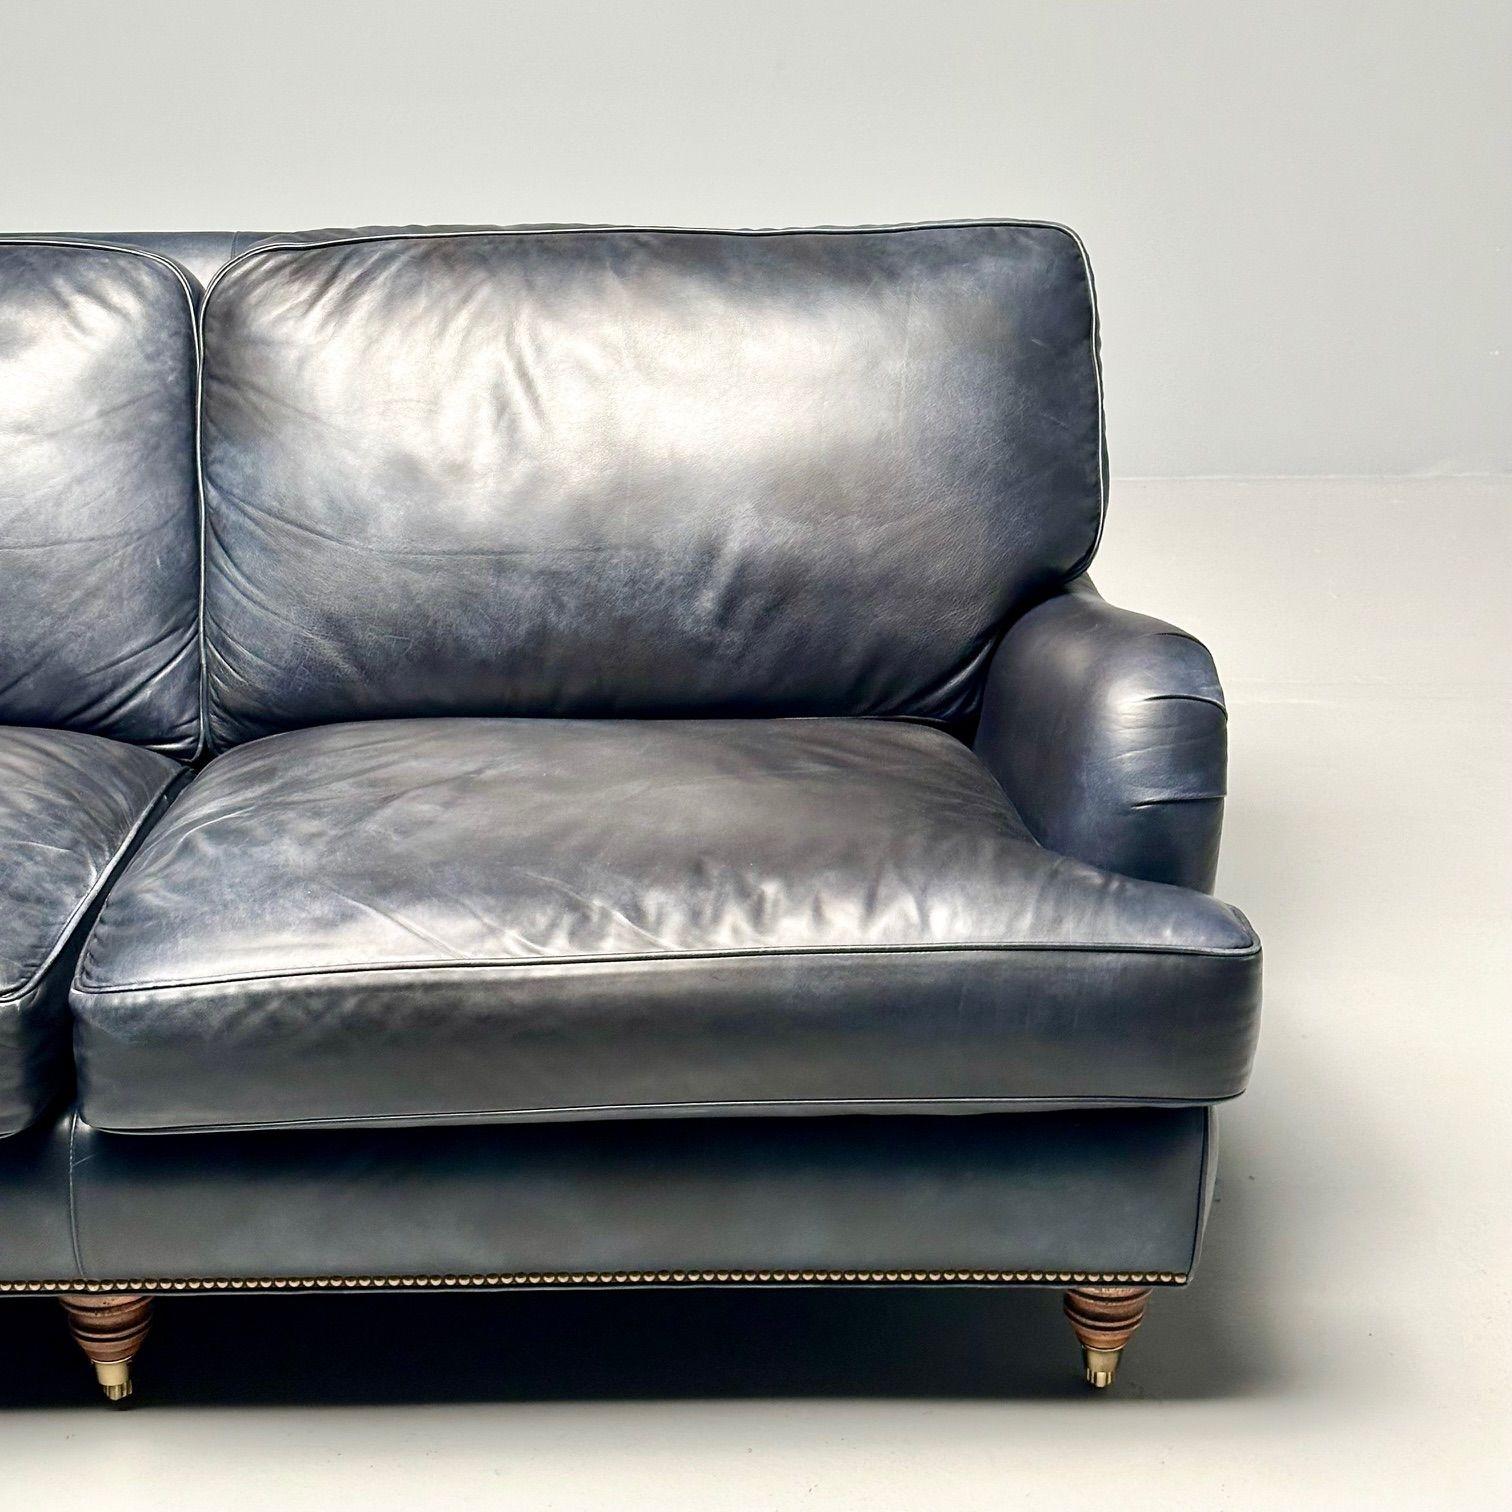 Hancock and Moore, Georgian Scroll Arm Sofa, Dark Blue Distressed Leather, 2000s For Sale 3